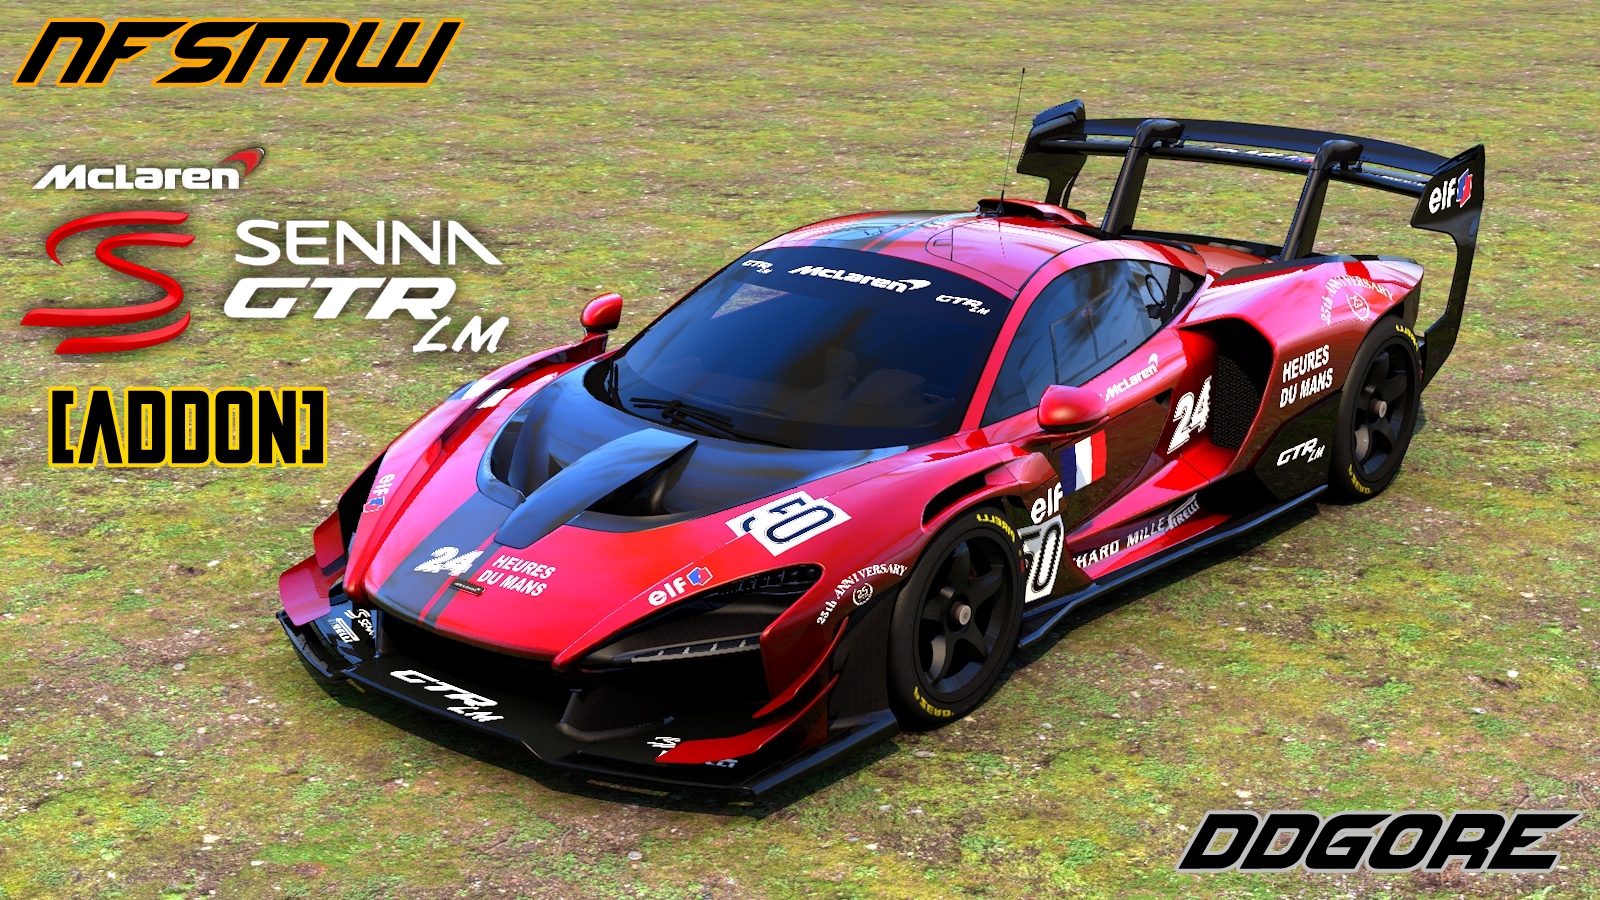 Need For Speed Most Wanted McLaren Senna GTR LM 2021 [ADDON]